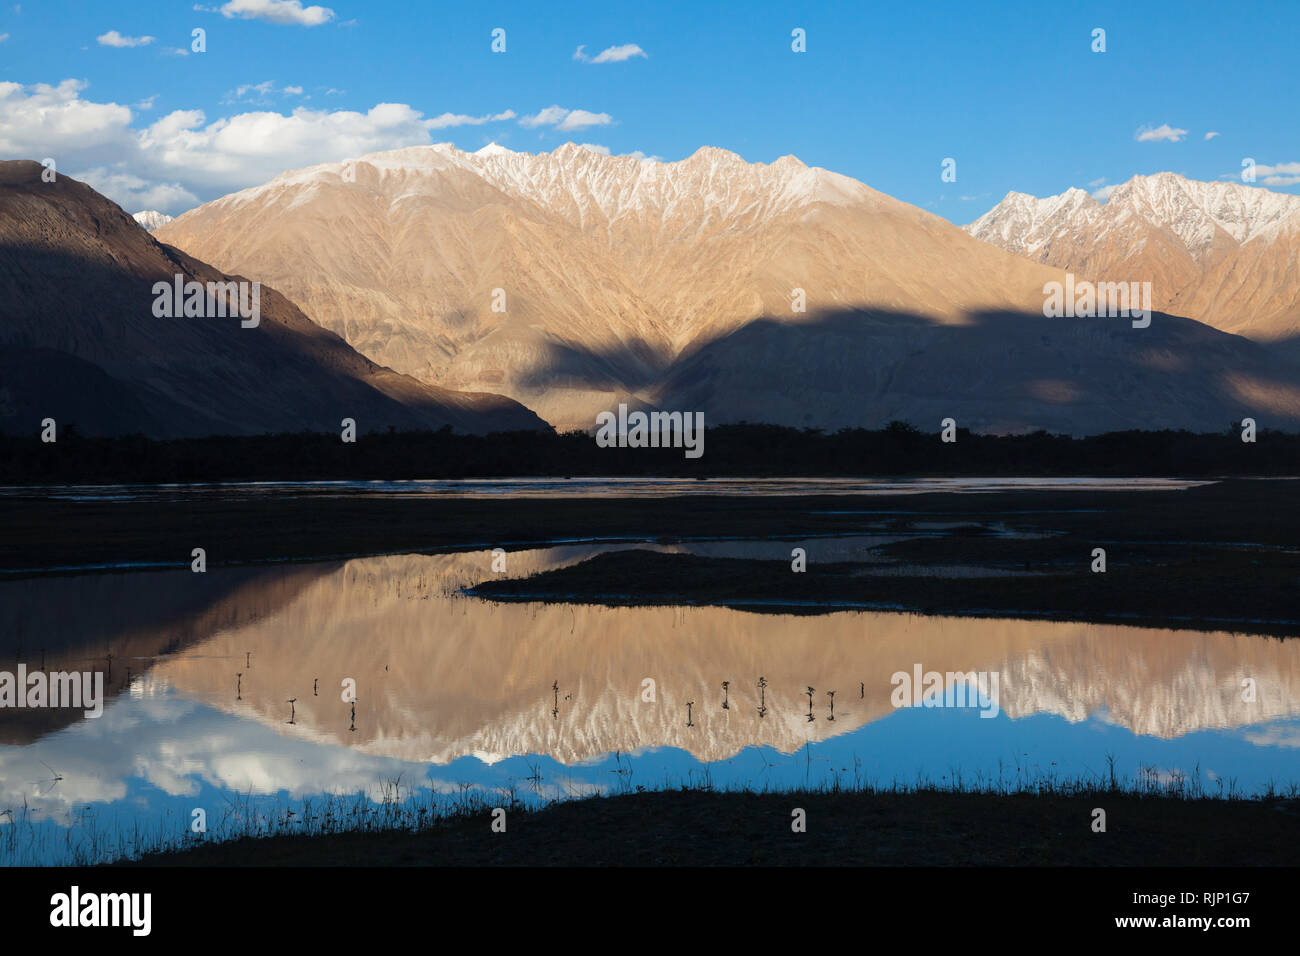 Beautiful landscape with slightly snow-capped mountains reflecting in the water, area of Hunder, Nubra Valley, Ladakh, Jammu and Kashmir, India Stock Photo